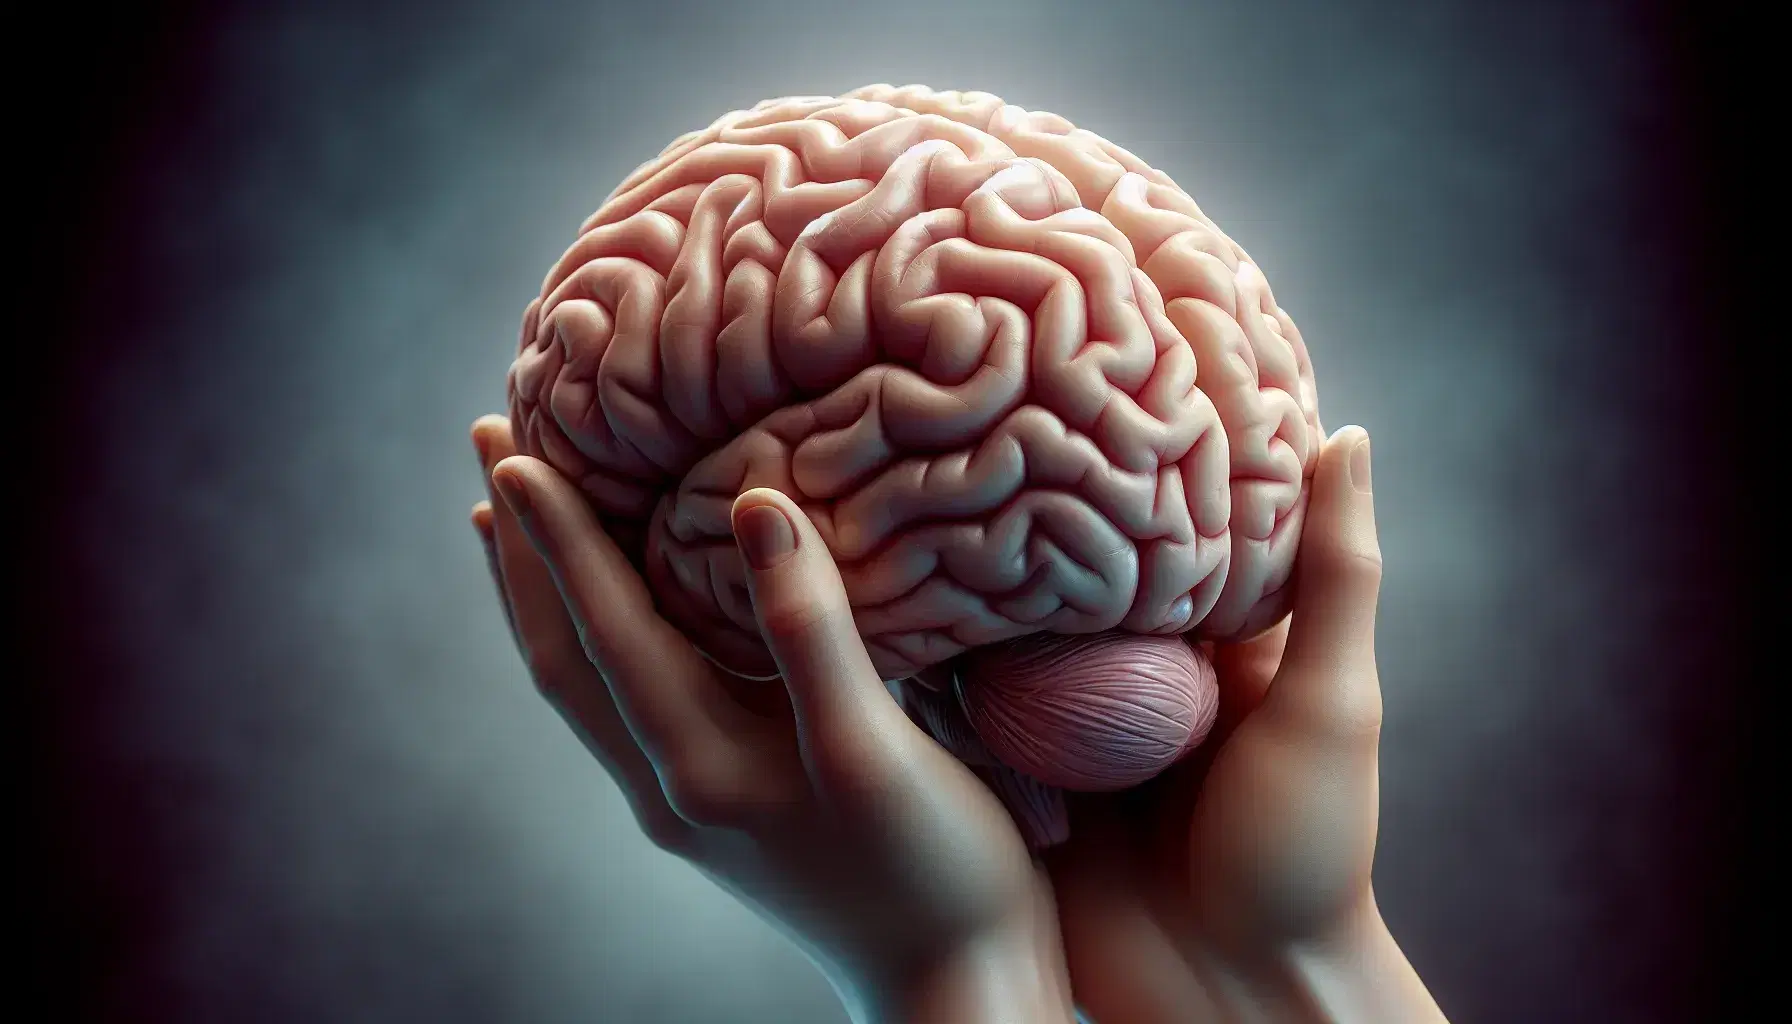 Human brain in lateral view with left hemisphere, held by caring hands on blurred blue-green background, precise anatomical details.